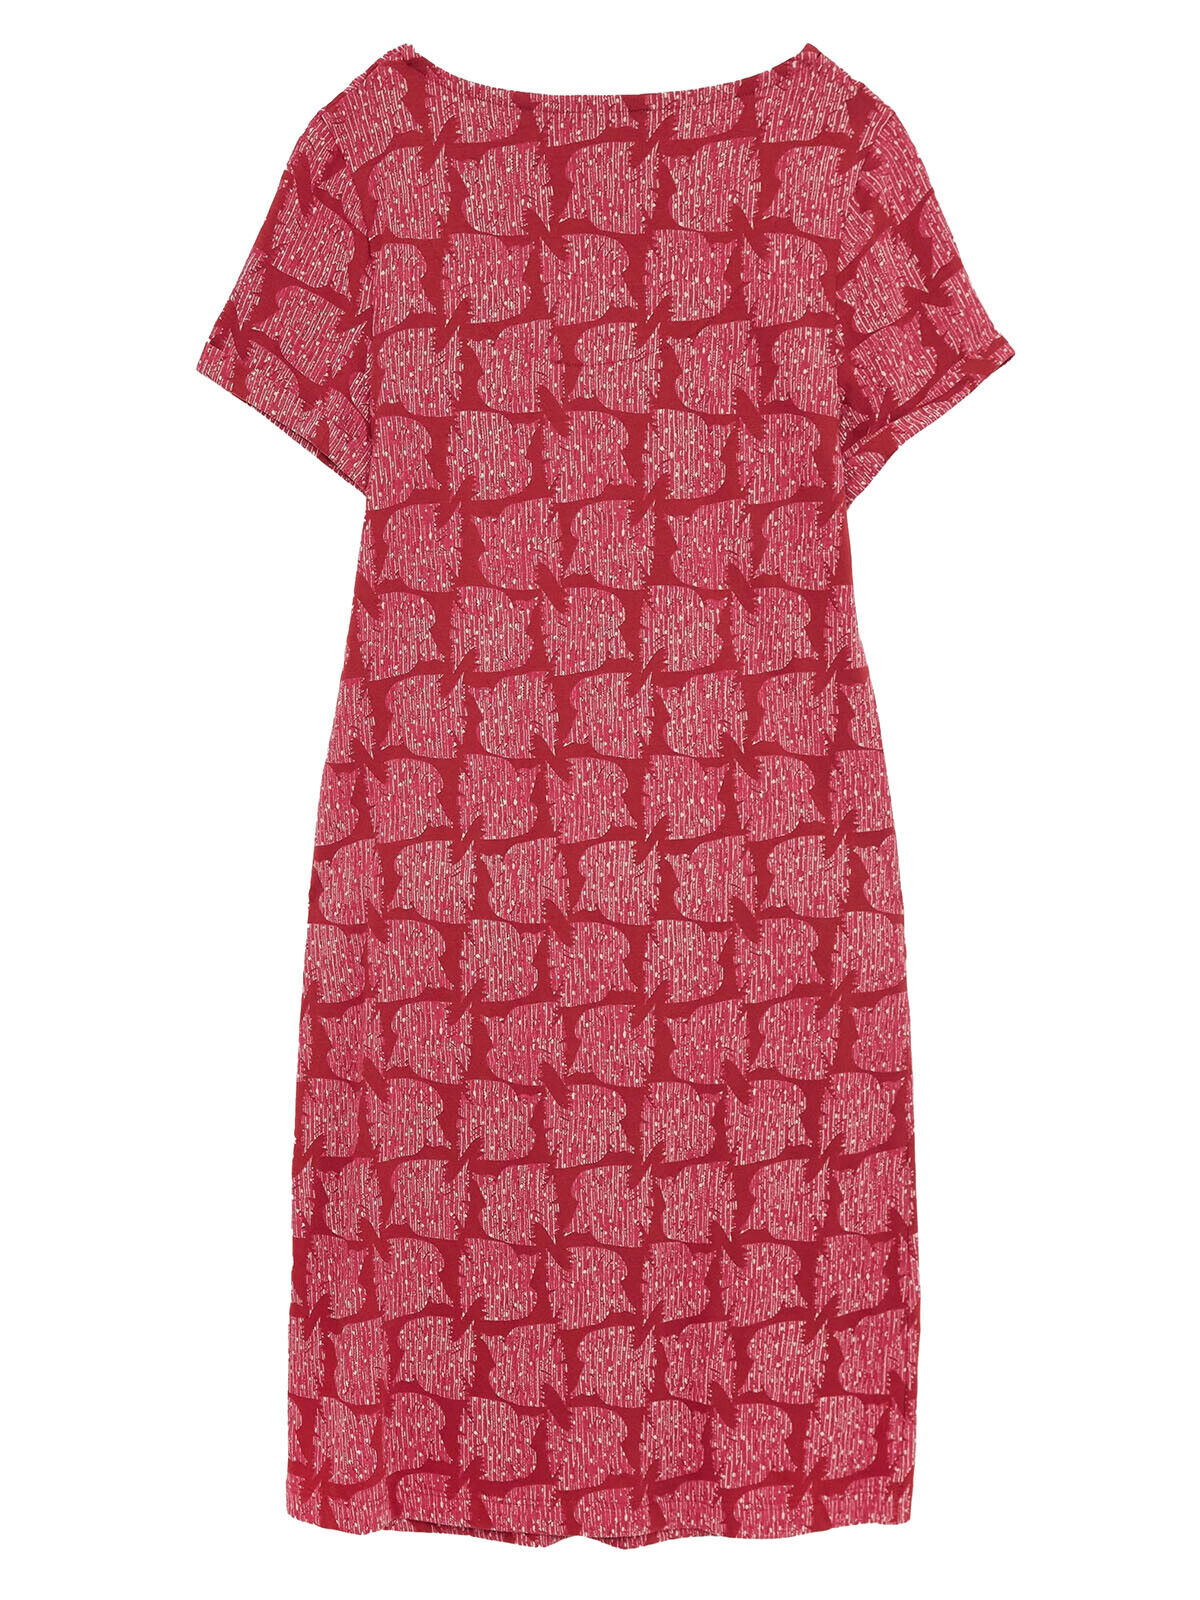 EX WHITE STUFF Red Selina Fairtrade Dress in Sizes 10, 12, 14 RRP £55